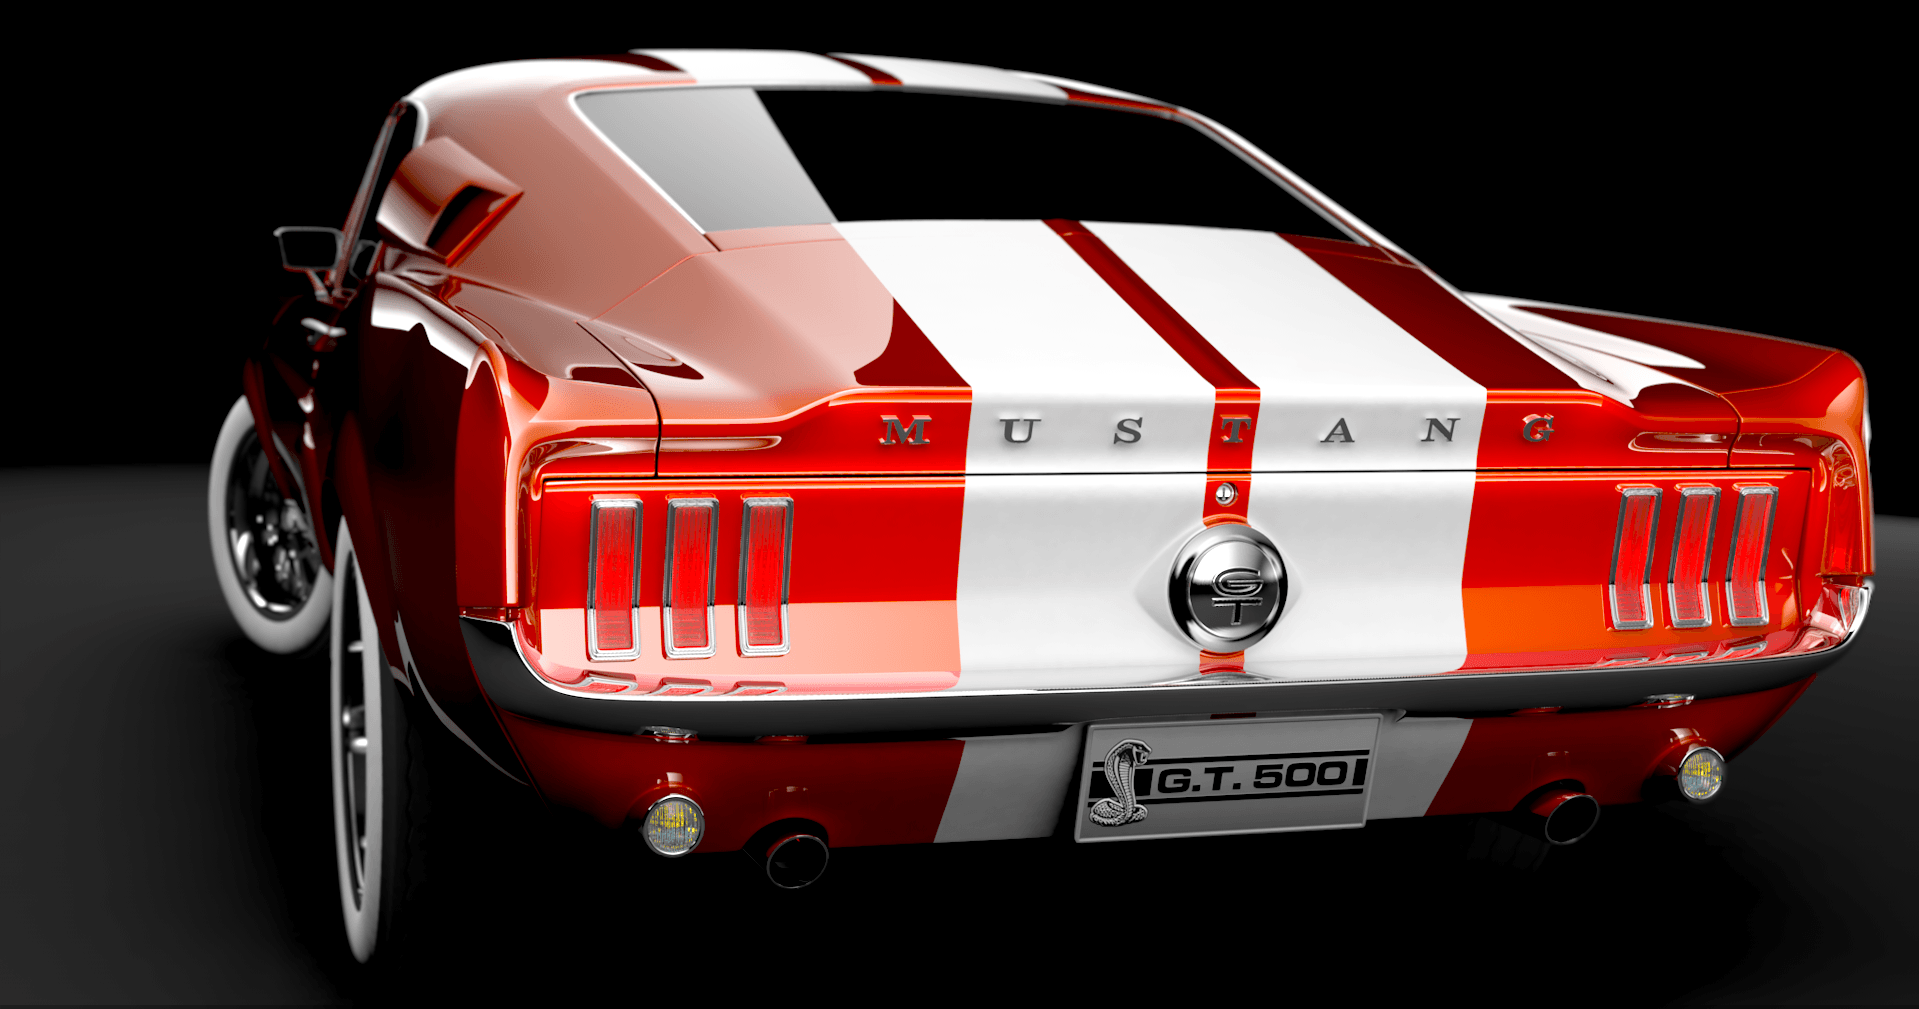 1967 Ford Mustang Red Wallpaper.png 919×009 Pixels. Ford